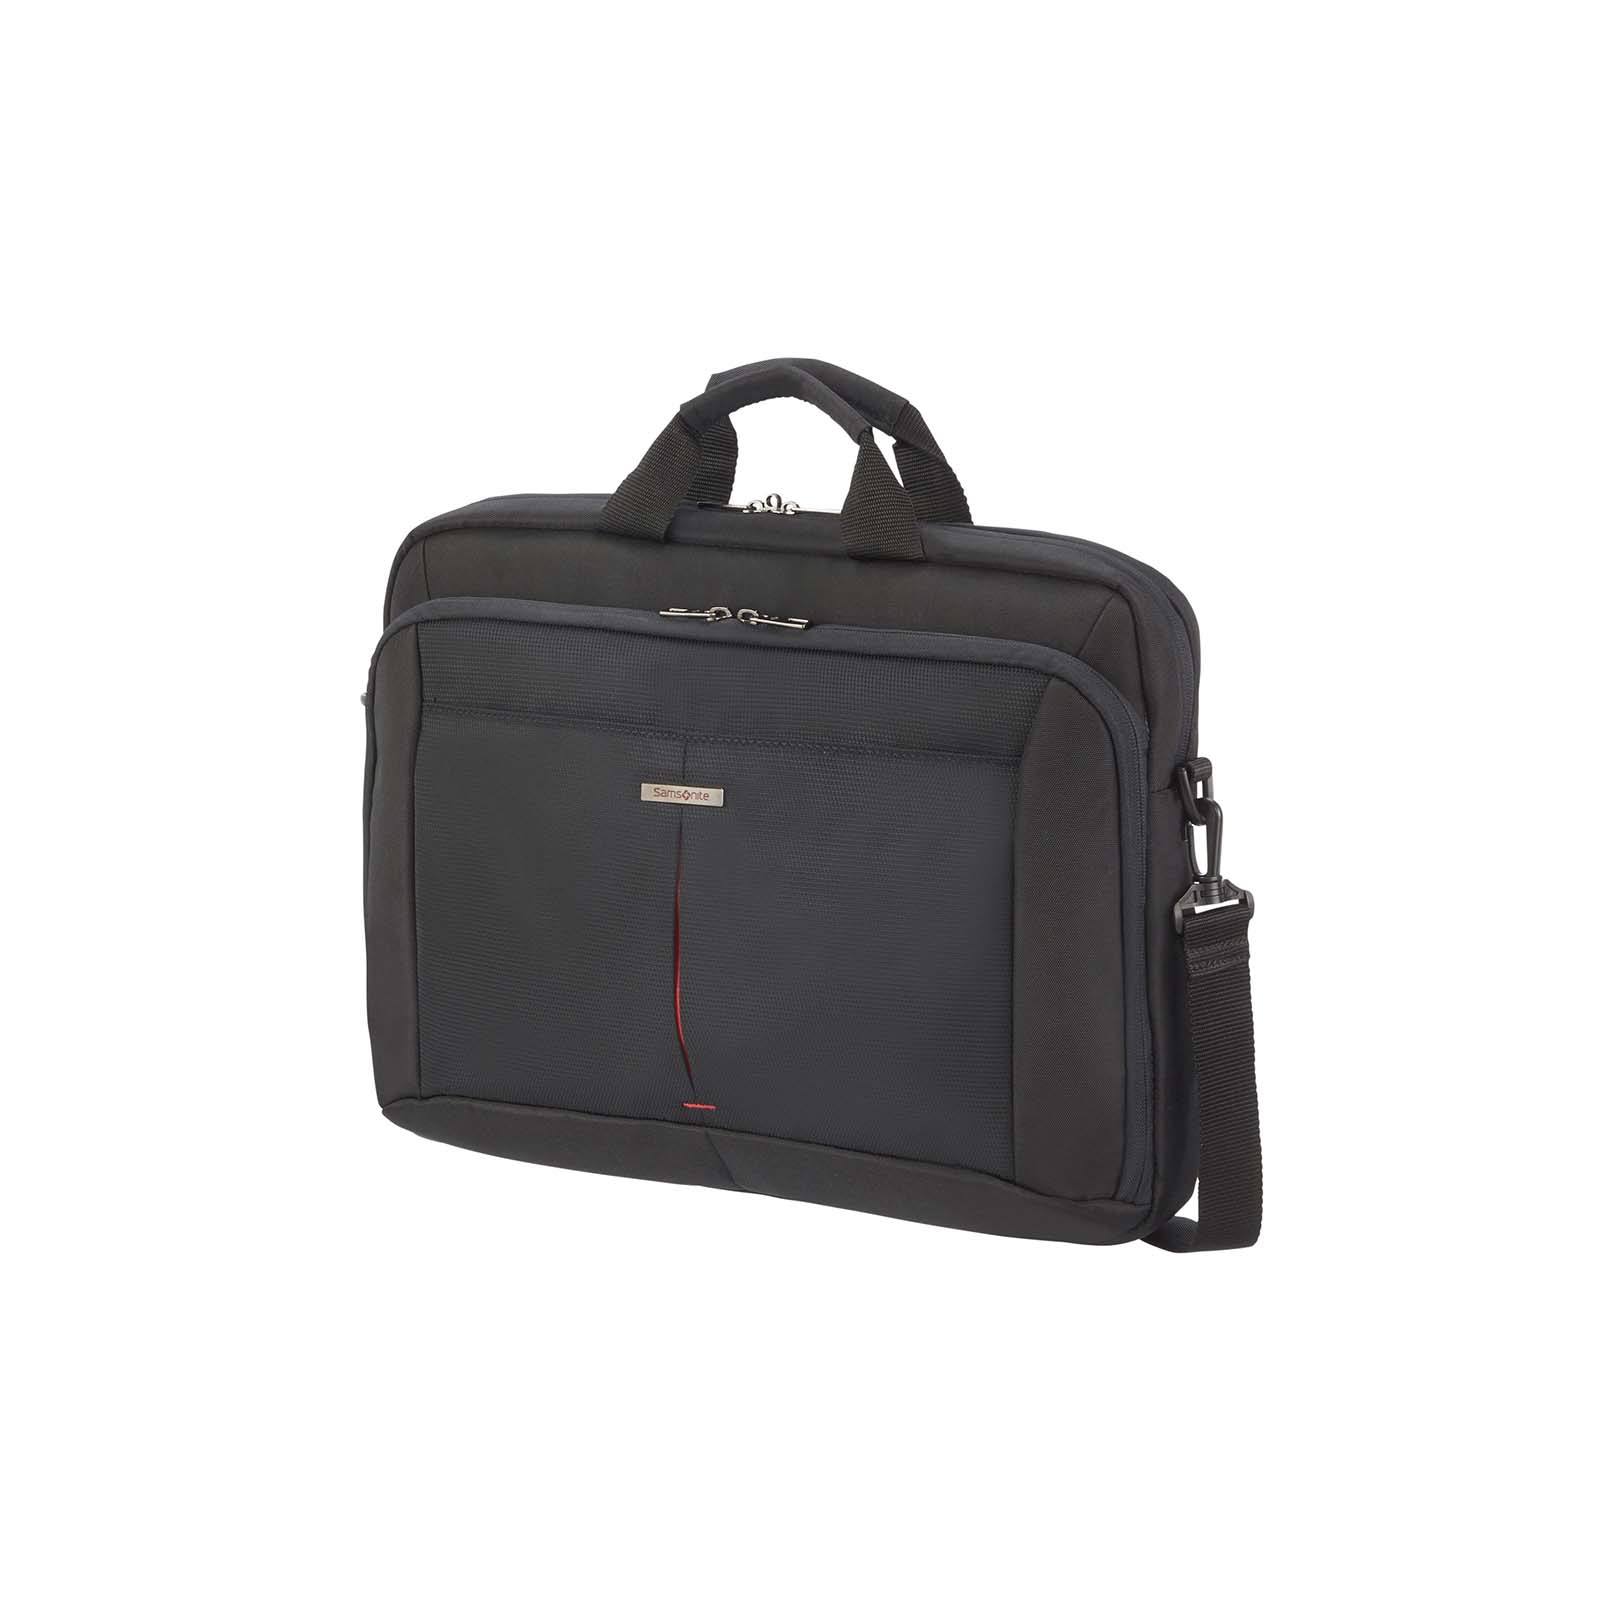 Samsonite-Guardit-2-17-Inch-Laptop-Briefcase-Front-Angle